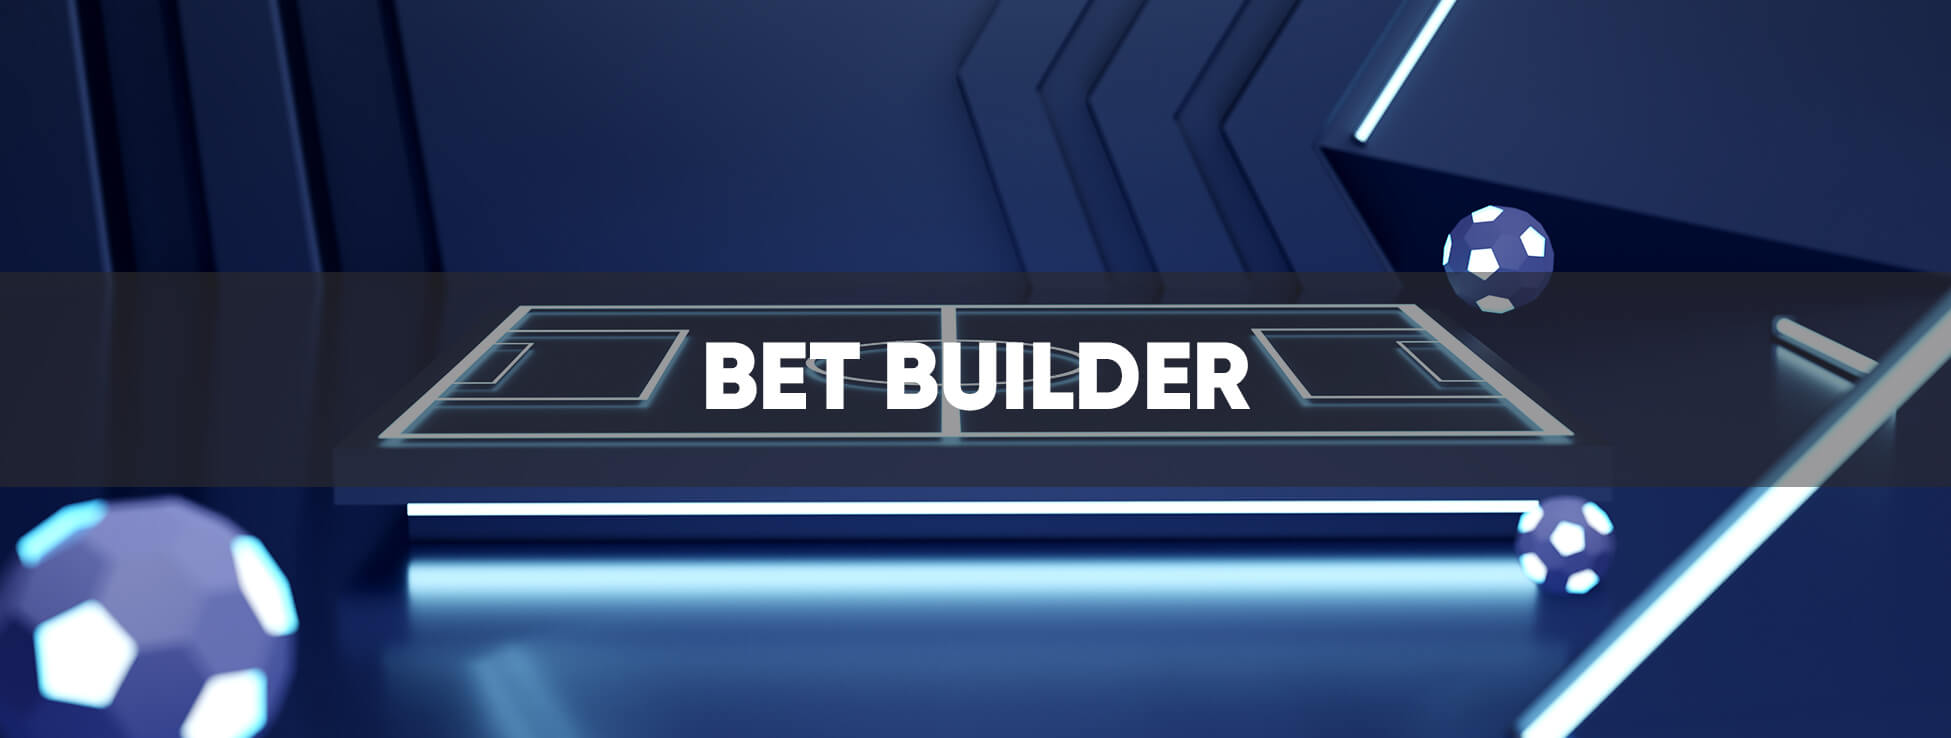 The betting constructor at Sportingbet